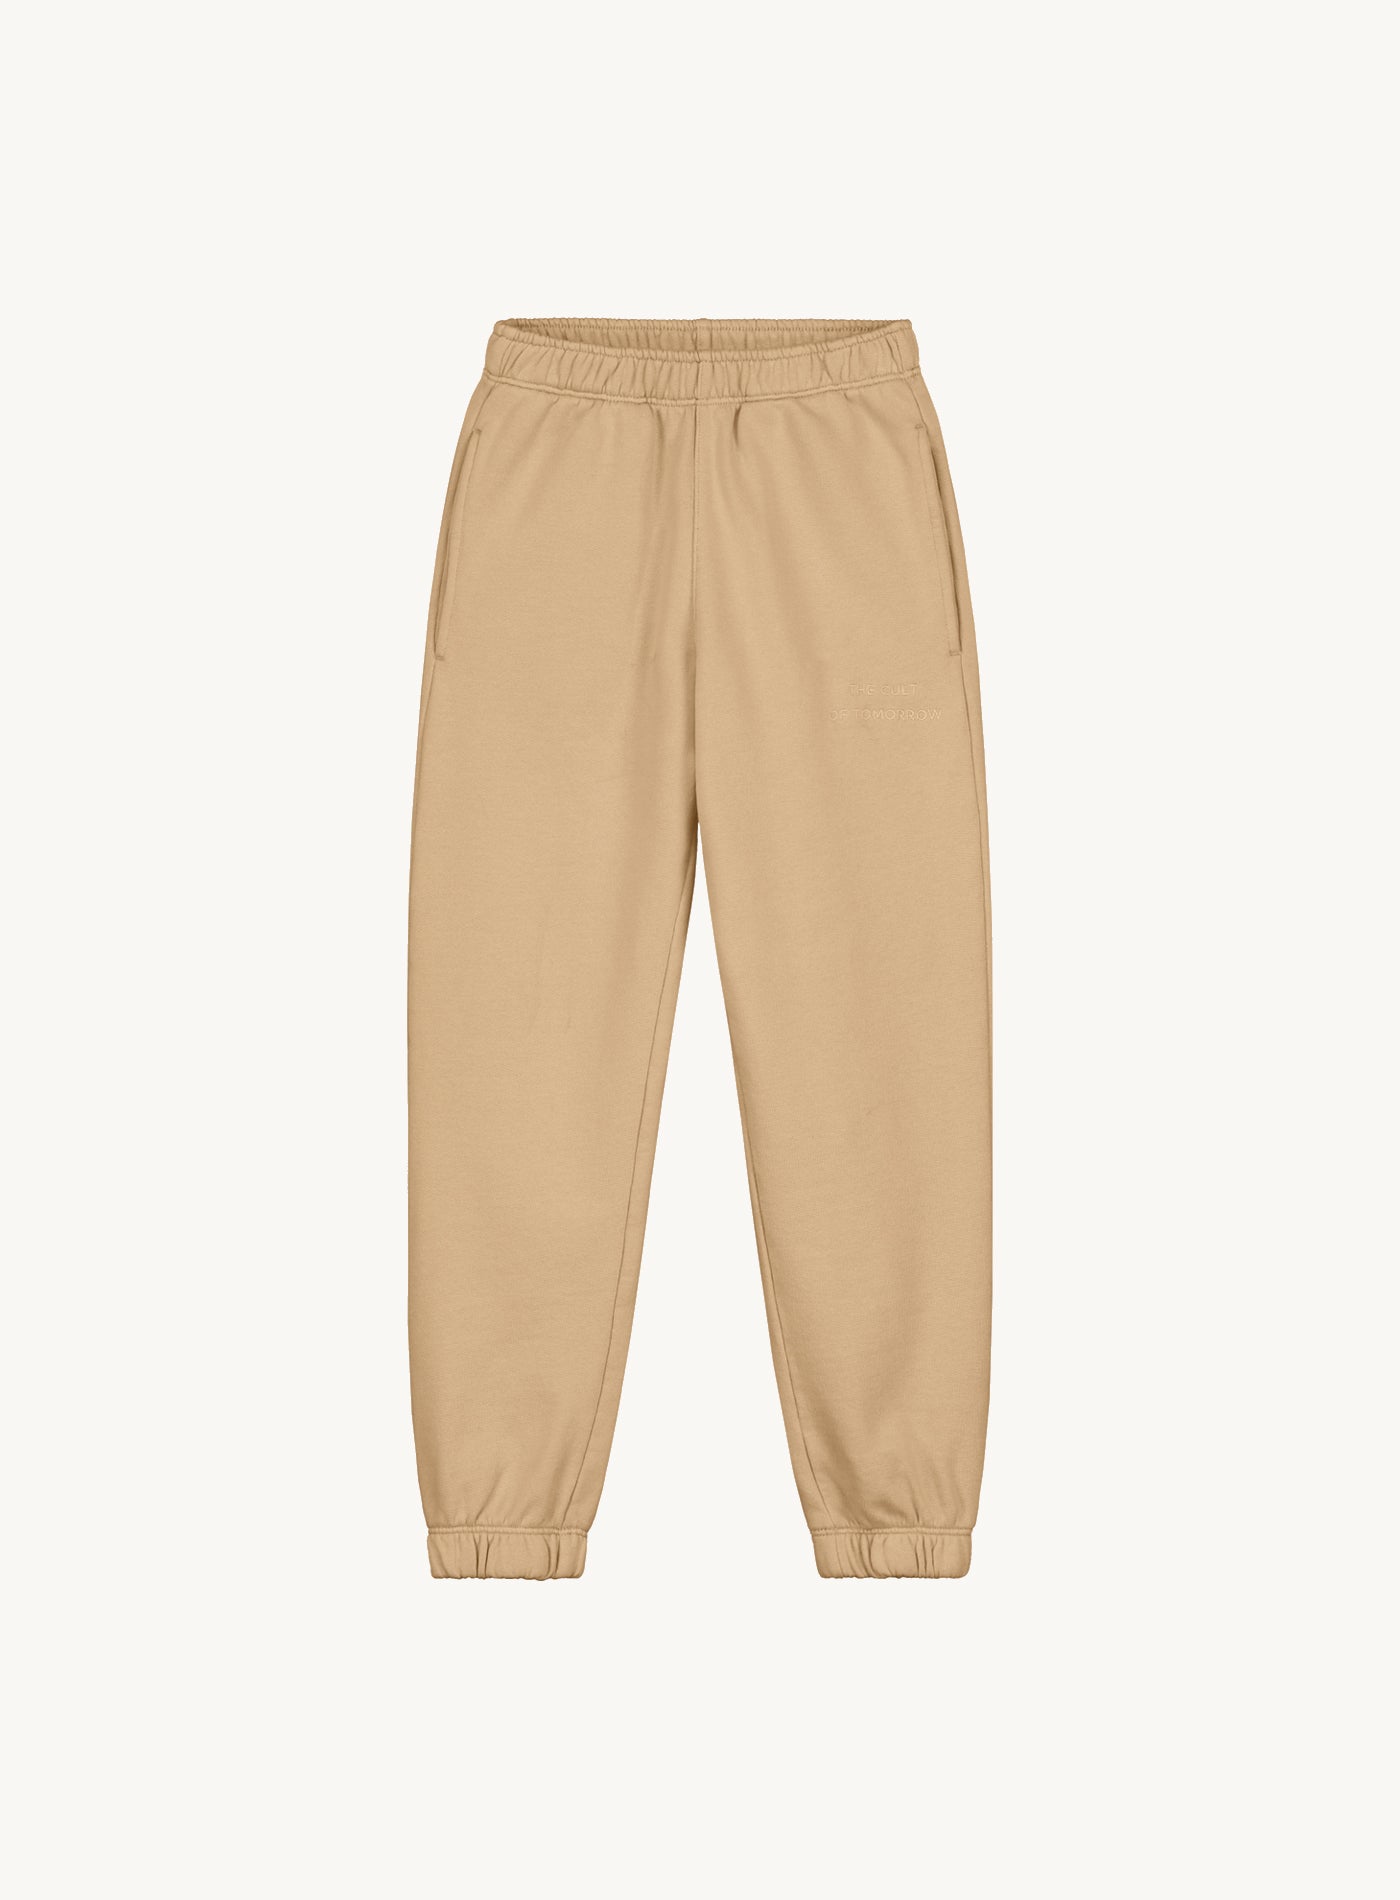 the SWEATPANTS in wheat